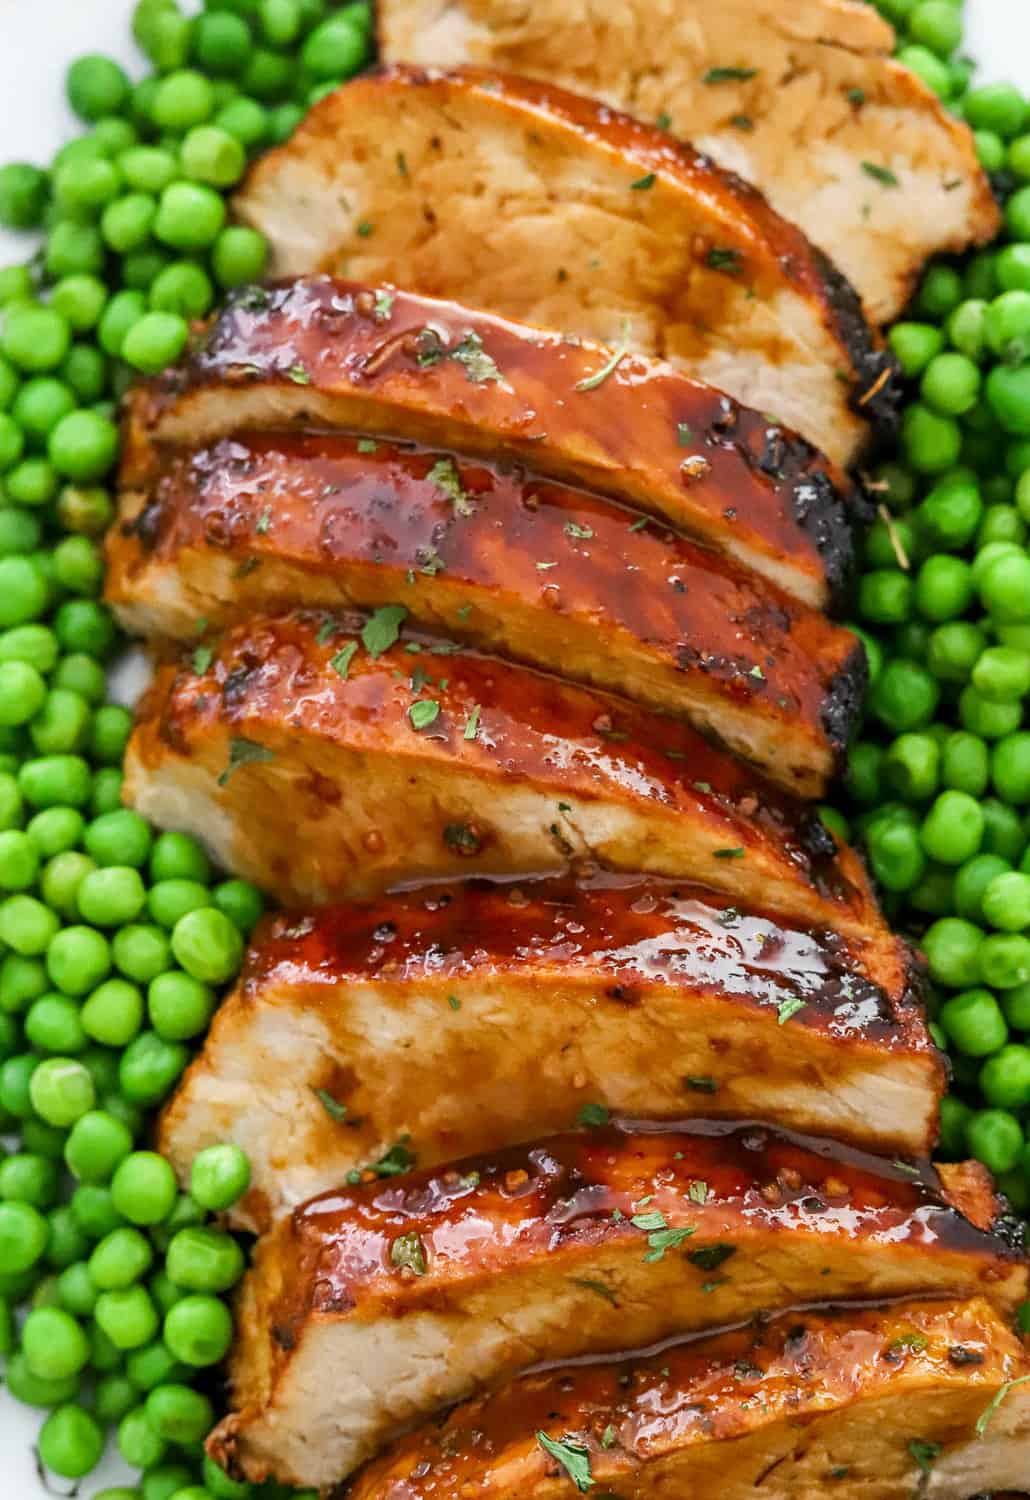 Close up of glazed brown sliced pork with green peas around it.